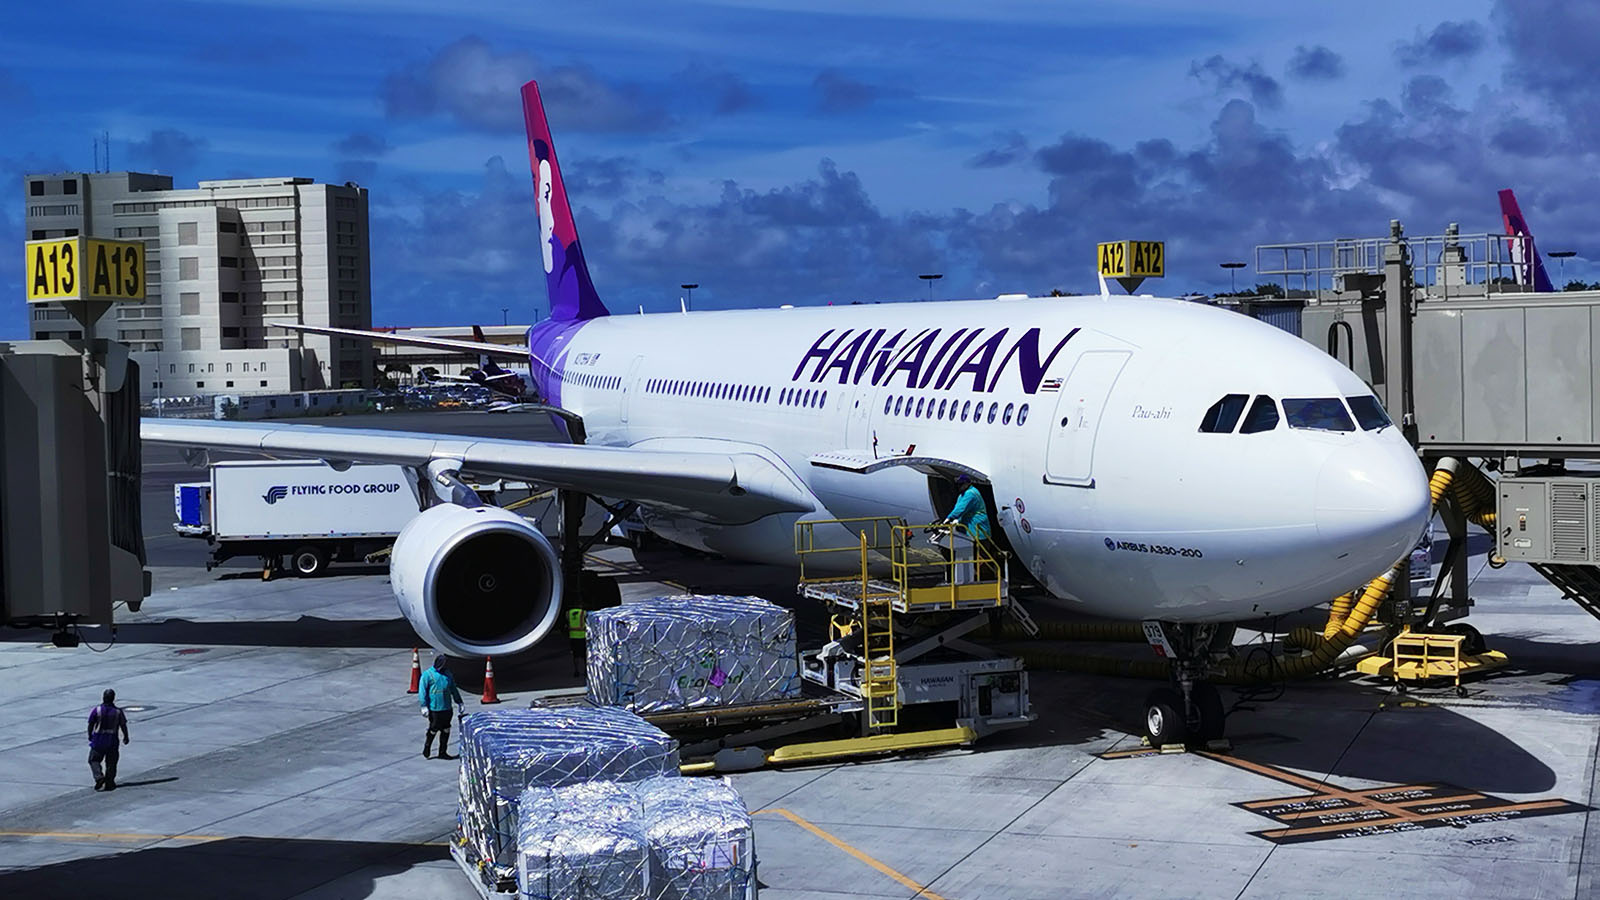 Hawaiian Airlines Airbus A330 parked at gate